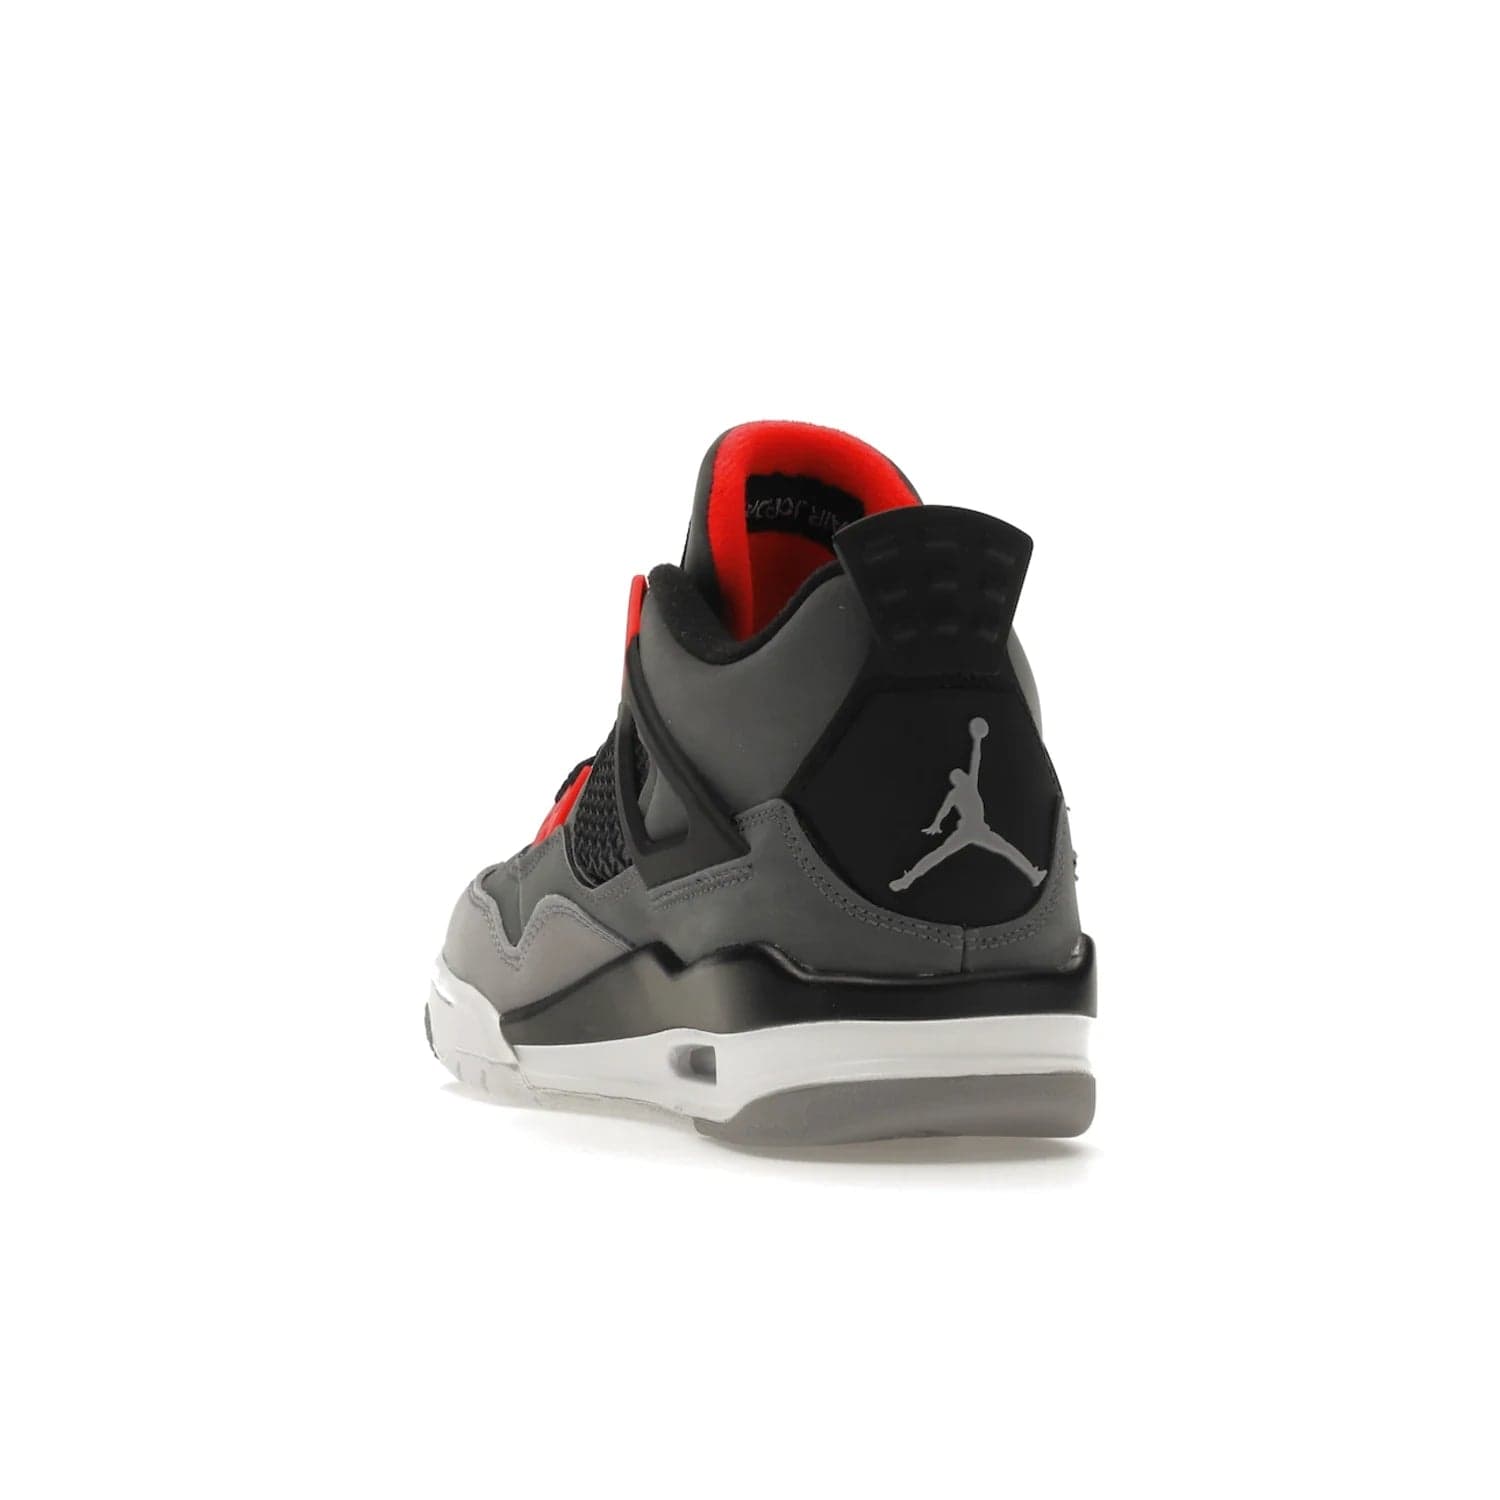 Jordan 4 Retro Infrared (GS) - Image 26 - Only at www.BallersClubKickz.com - Shop the Air Jordan 4 Retro Infrared (GS) for a classic silhouette with subtle yet bold features. Dark grey nubuck upper with lighter forefoot overlay, black accents, Infrared molded eyelets & woven tongue tag. Available June 2022.